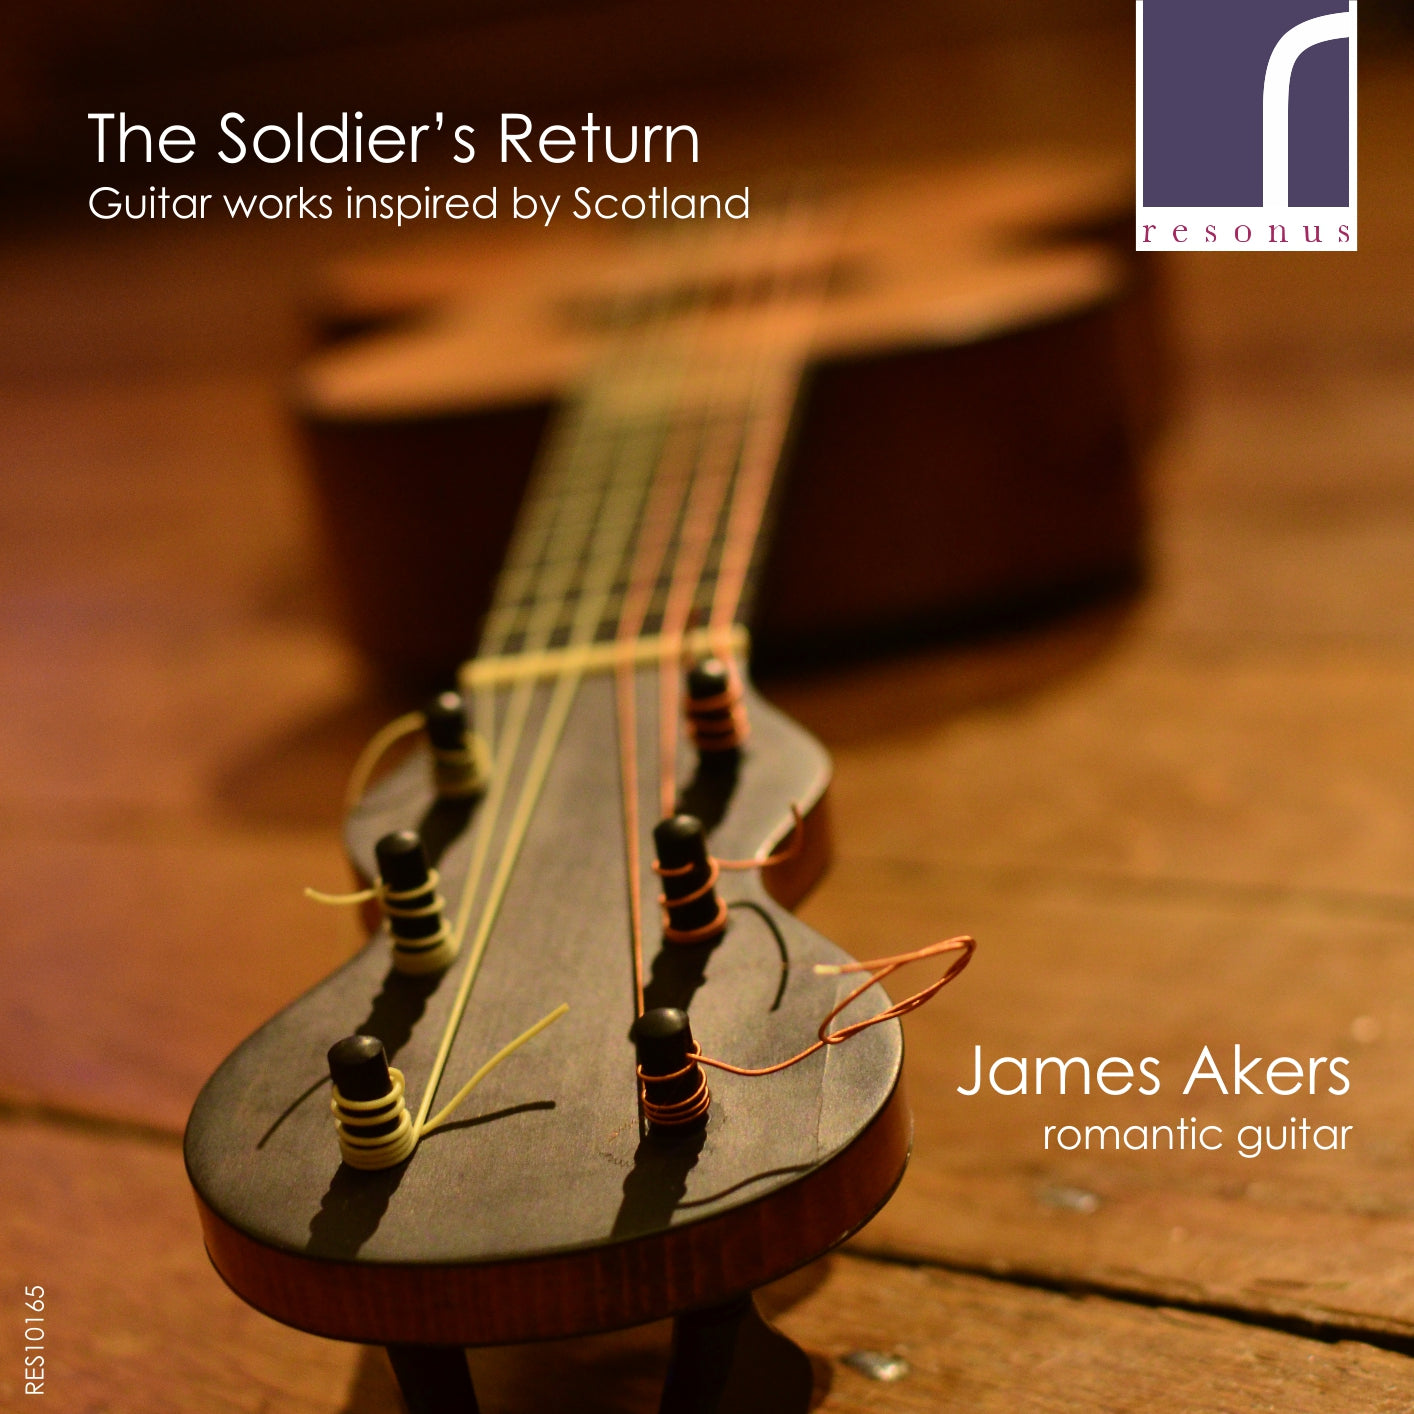 The Soldier's Return: Guitar Music Inspired by Scotland